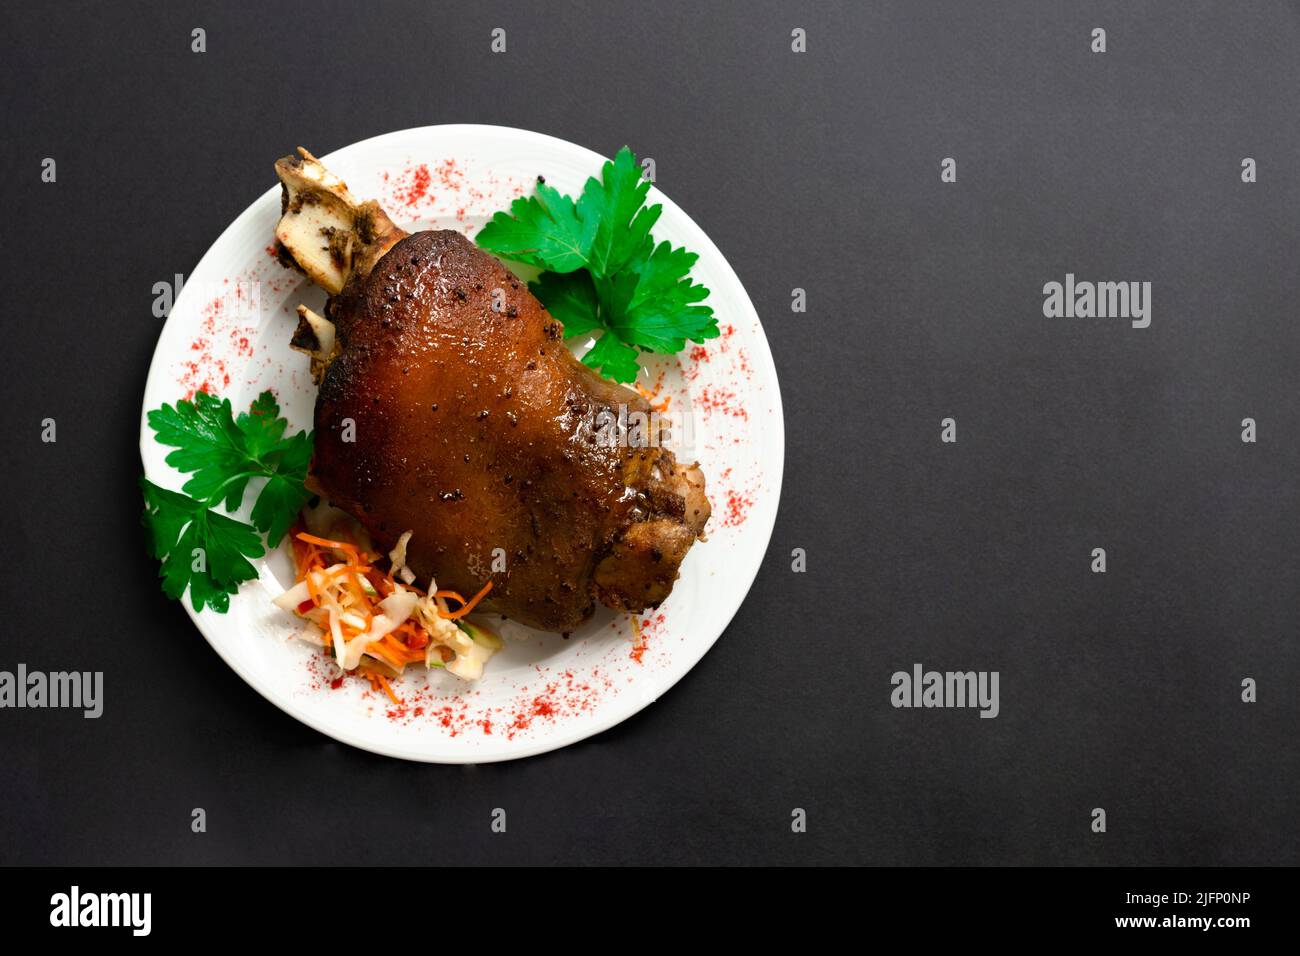 Roasted pork knuckle. Ham and bacon are popular foods in the west. Smoked ham hock with herbs and spices. Black isolated .German Haxe or Schweinshaxe. Stock Photo